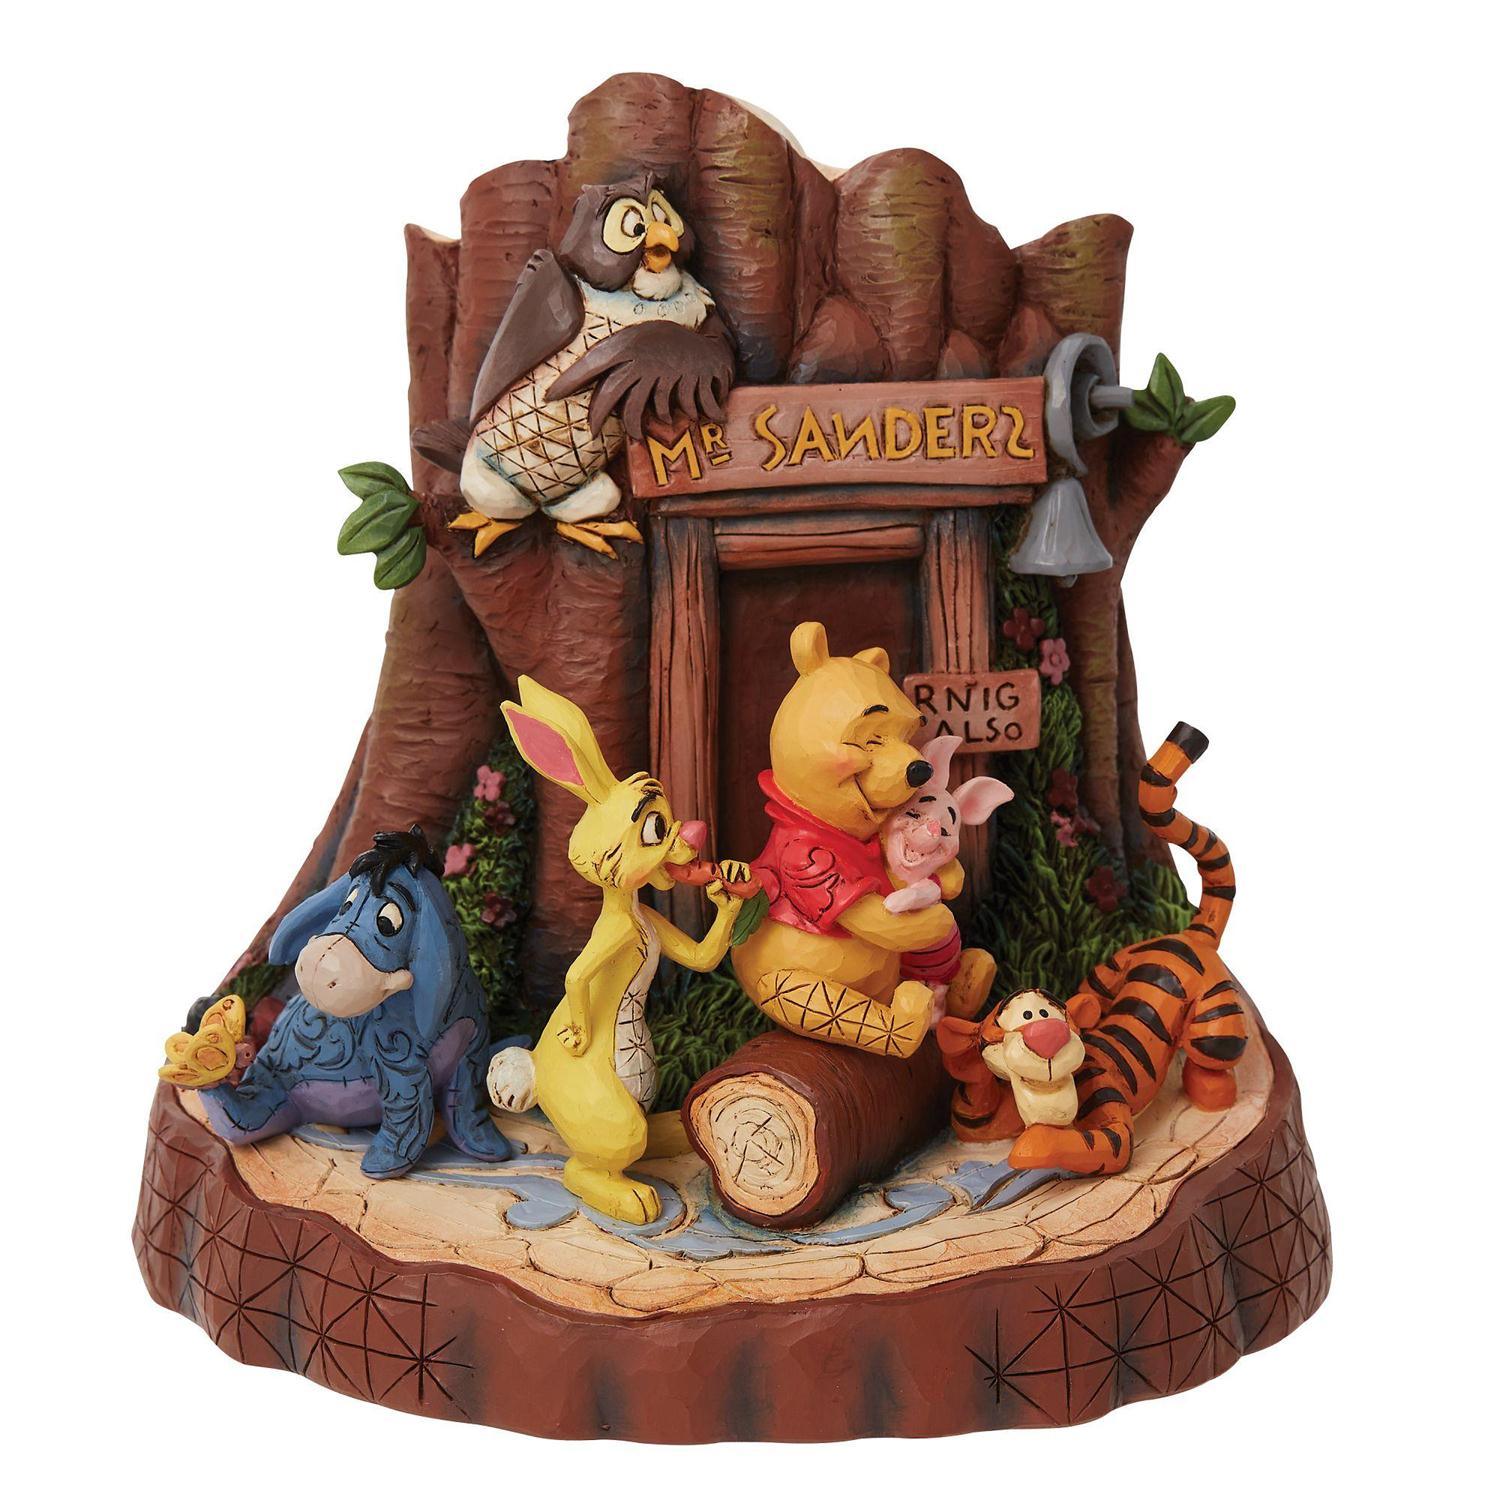 Pooh Carved by Heart Disney Traditions Statue by Enesco -Enesco - India - www.superherotoystore.com